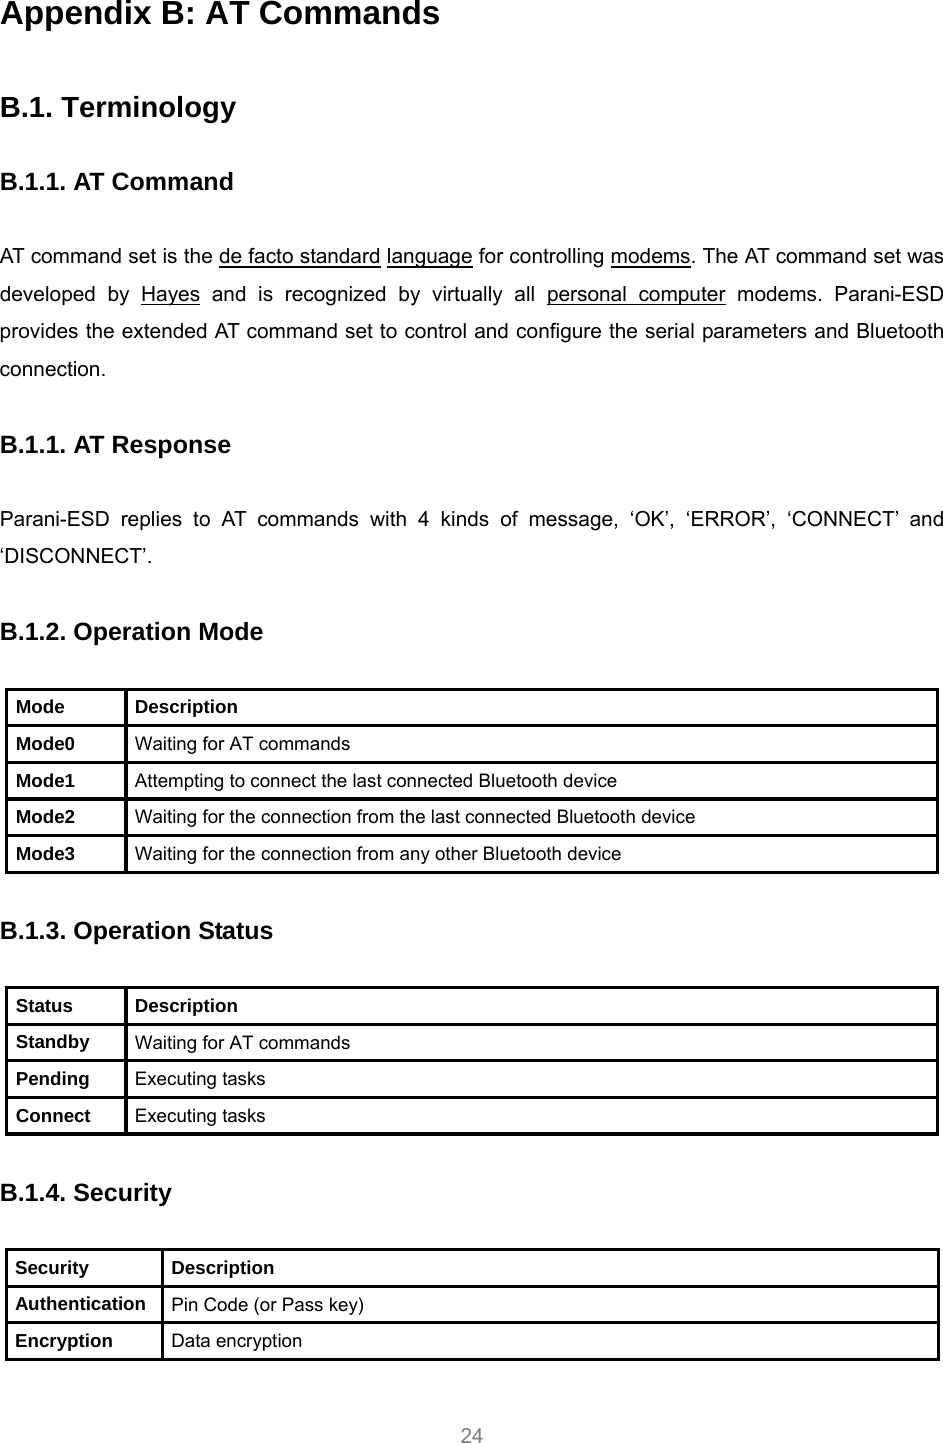     24 Appendix B: AT Commands  B.1. Terminology  B.1.1. AT Command  AT command set is the HTde facto standardTH HTlanguageTH for controlling HTmodemsTH. The AT command set was developed by HTHayesTH and is recognized by virtually all HTpersonal computerTH modems. Parani-ESD provides the extended AT command set to control and configure the serial parameters and Bluetooth connection.  B.1.1. AT Response  Parani-ESD replies to AT commands with 4 kinds of message, ‘OK’, ‘ERROR’, ‘CONNECT’ and ‘DISCONNECT’.  B.1.2. Operation Mode  Mode Description Mode0  Waiting for AT commands Mode1  Attempting to connect the last connected Bluetooth device Mode2  Waiting for the connection from the last connected Bluetooth device Mode3  Waiting for the connection from any other Bluetooth device  B.1.3. Operation Status  Status Description Standby  Waiting for AT commands Pending  Executing tasks Connect  Executing tasks  B.1.4. Security  Security Description Authentication  Pin Code (or Pass key) Encryption  Data encryption  